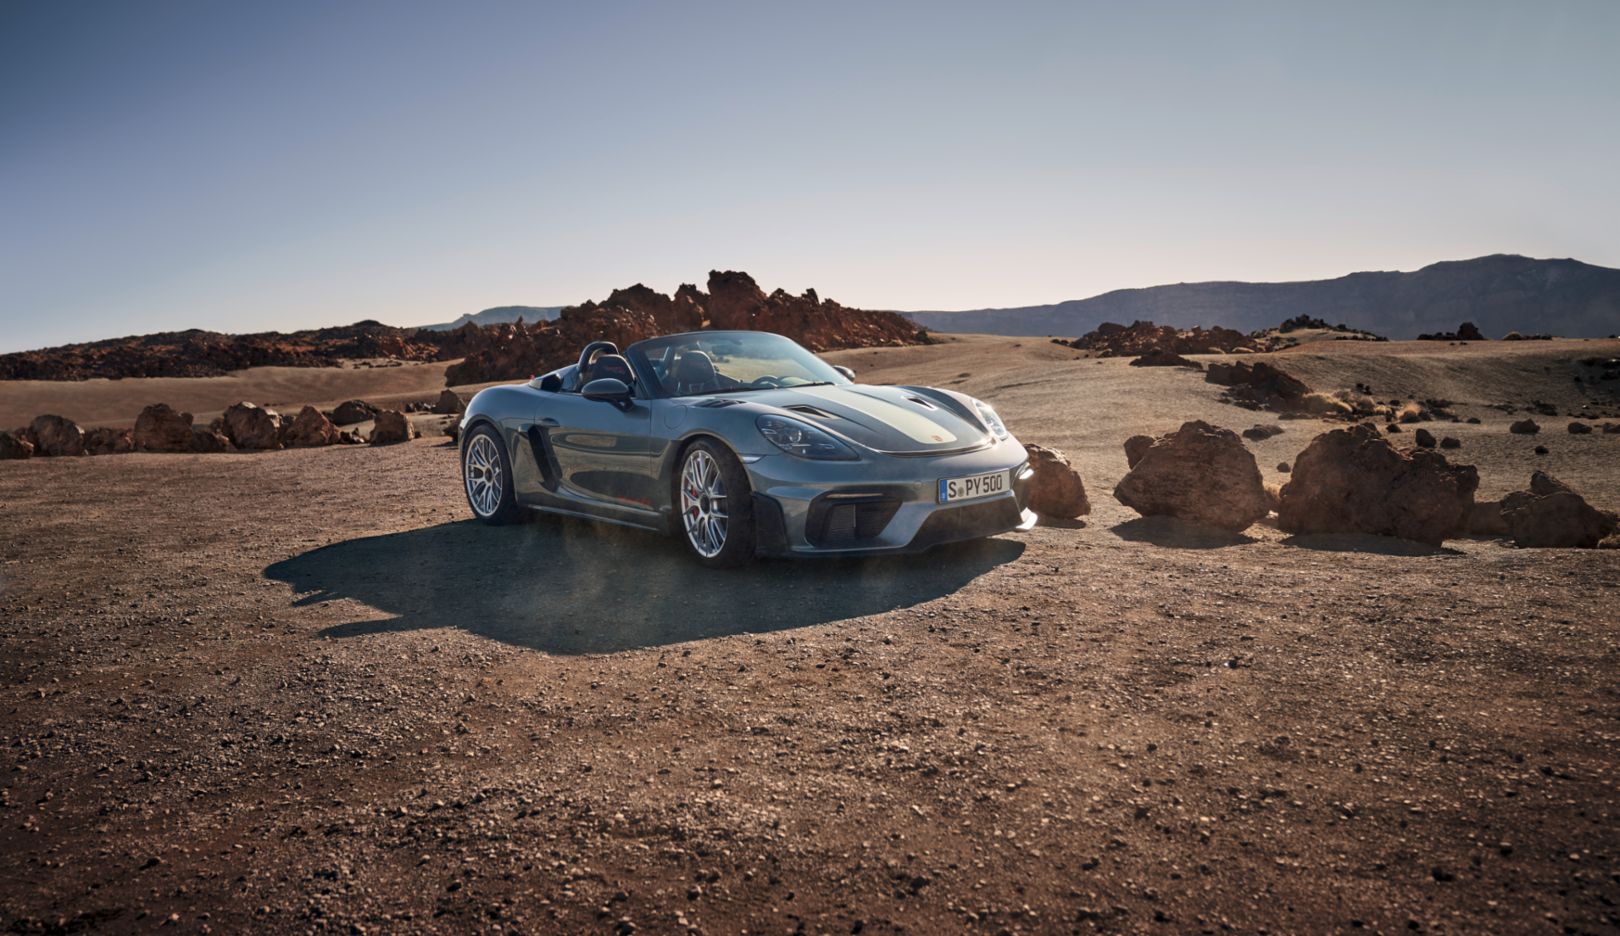 The mid-engine mounted roadster accelerates from 0 to 60 mph in 3.4 seconds.